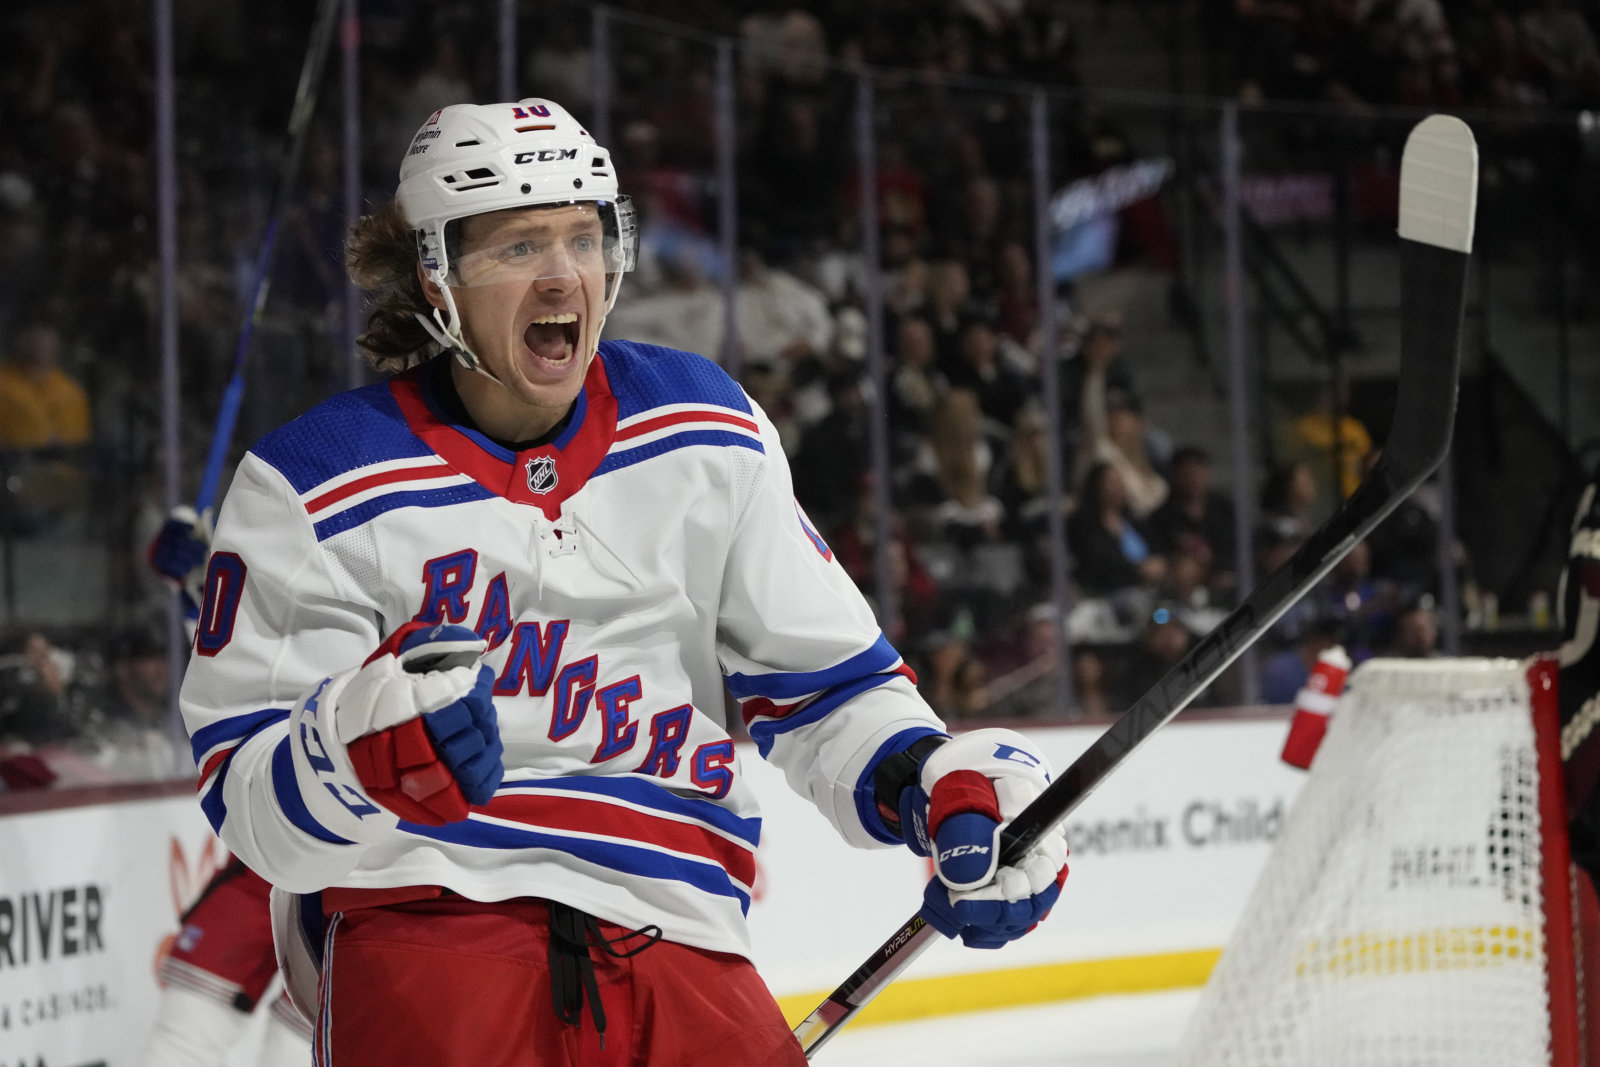 Rangers have used a far more aggressive Artemi Panarin for 6th straight